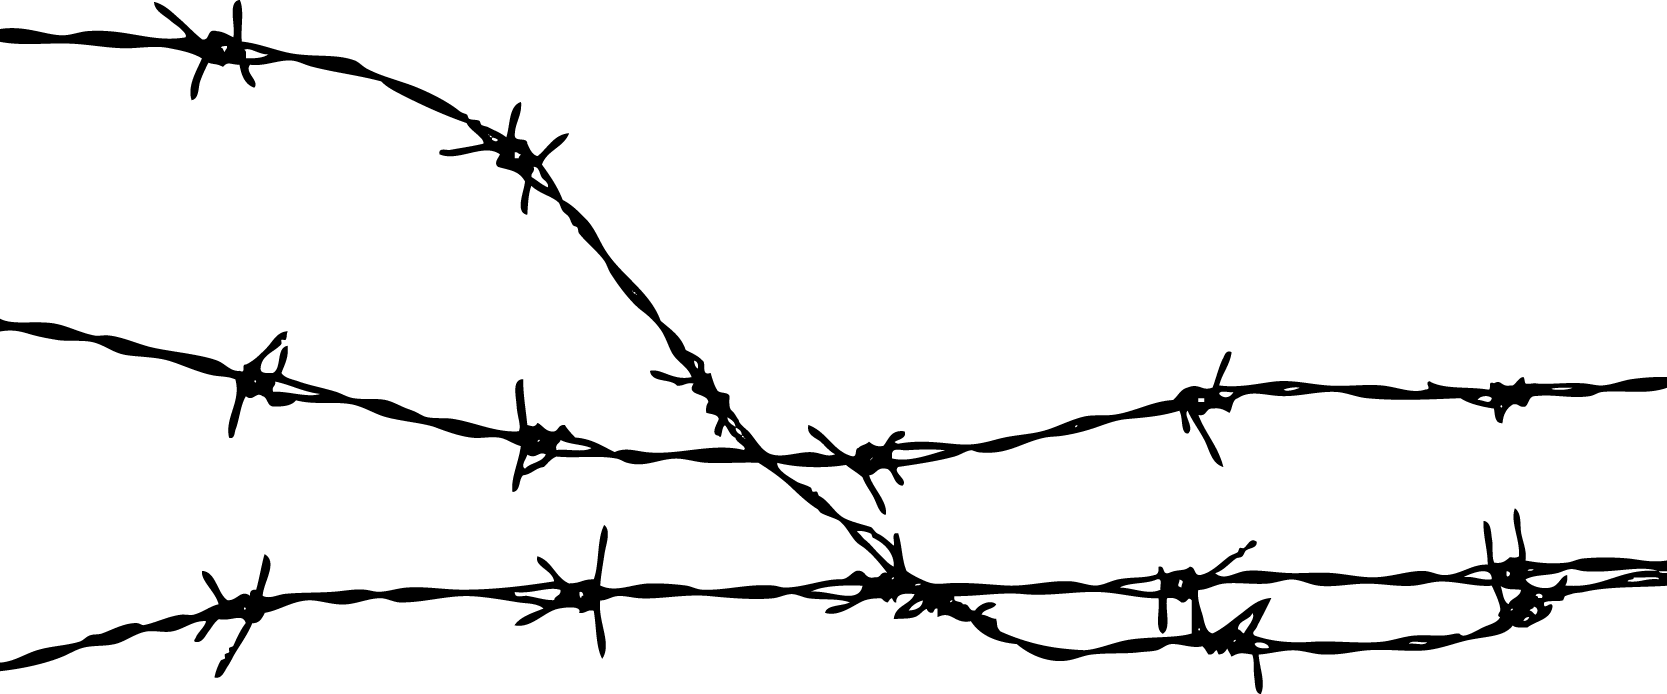 4 barbed wire clipart. Free cliparts that you can download to you computer and use in your designs.